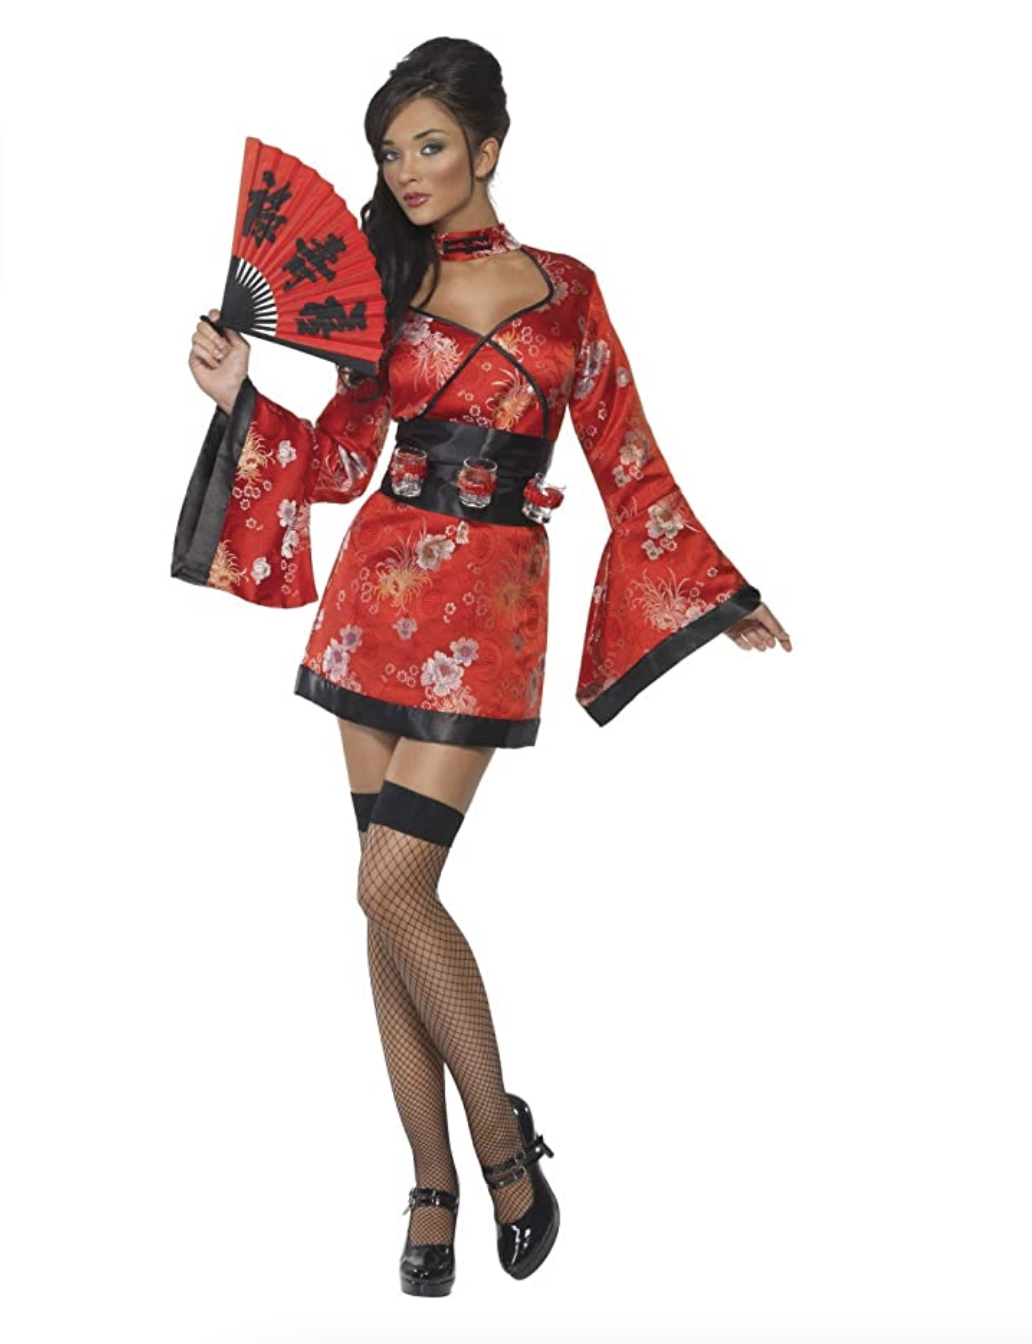 A woman dressed up in a kimono